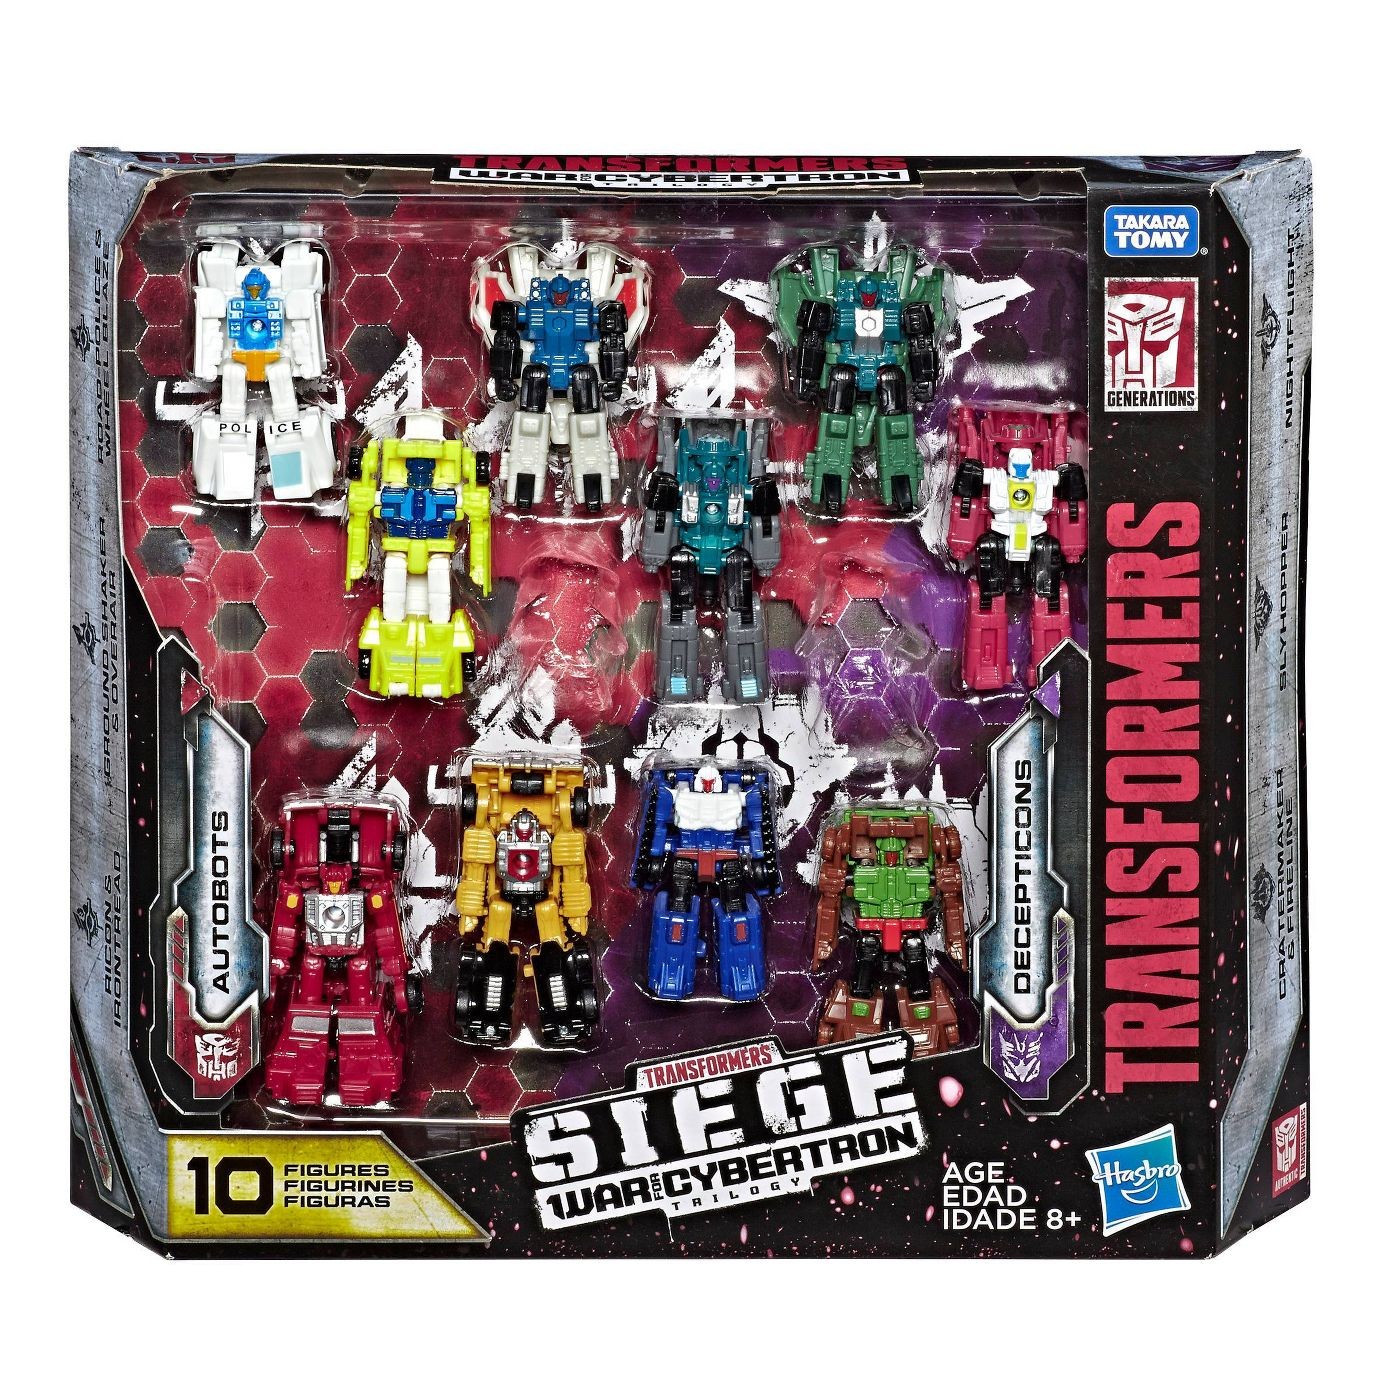 Transformers News: Transformers War for Cybertron Siege Micromaster 10 Pack Available at Target.Com